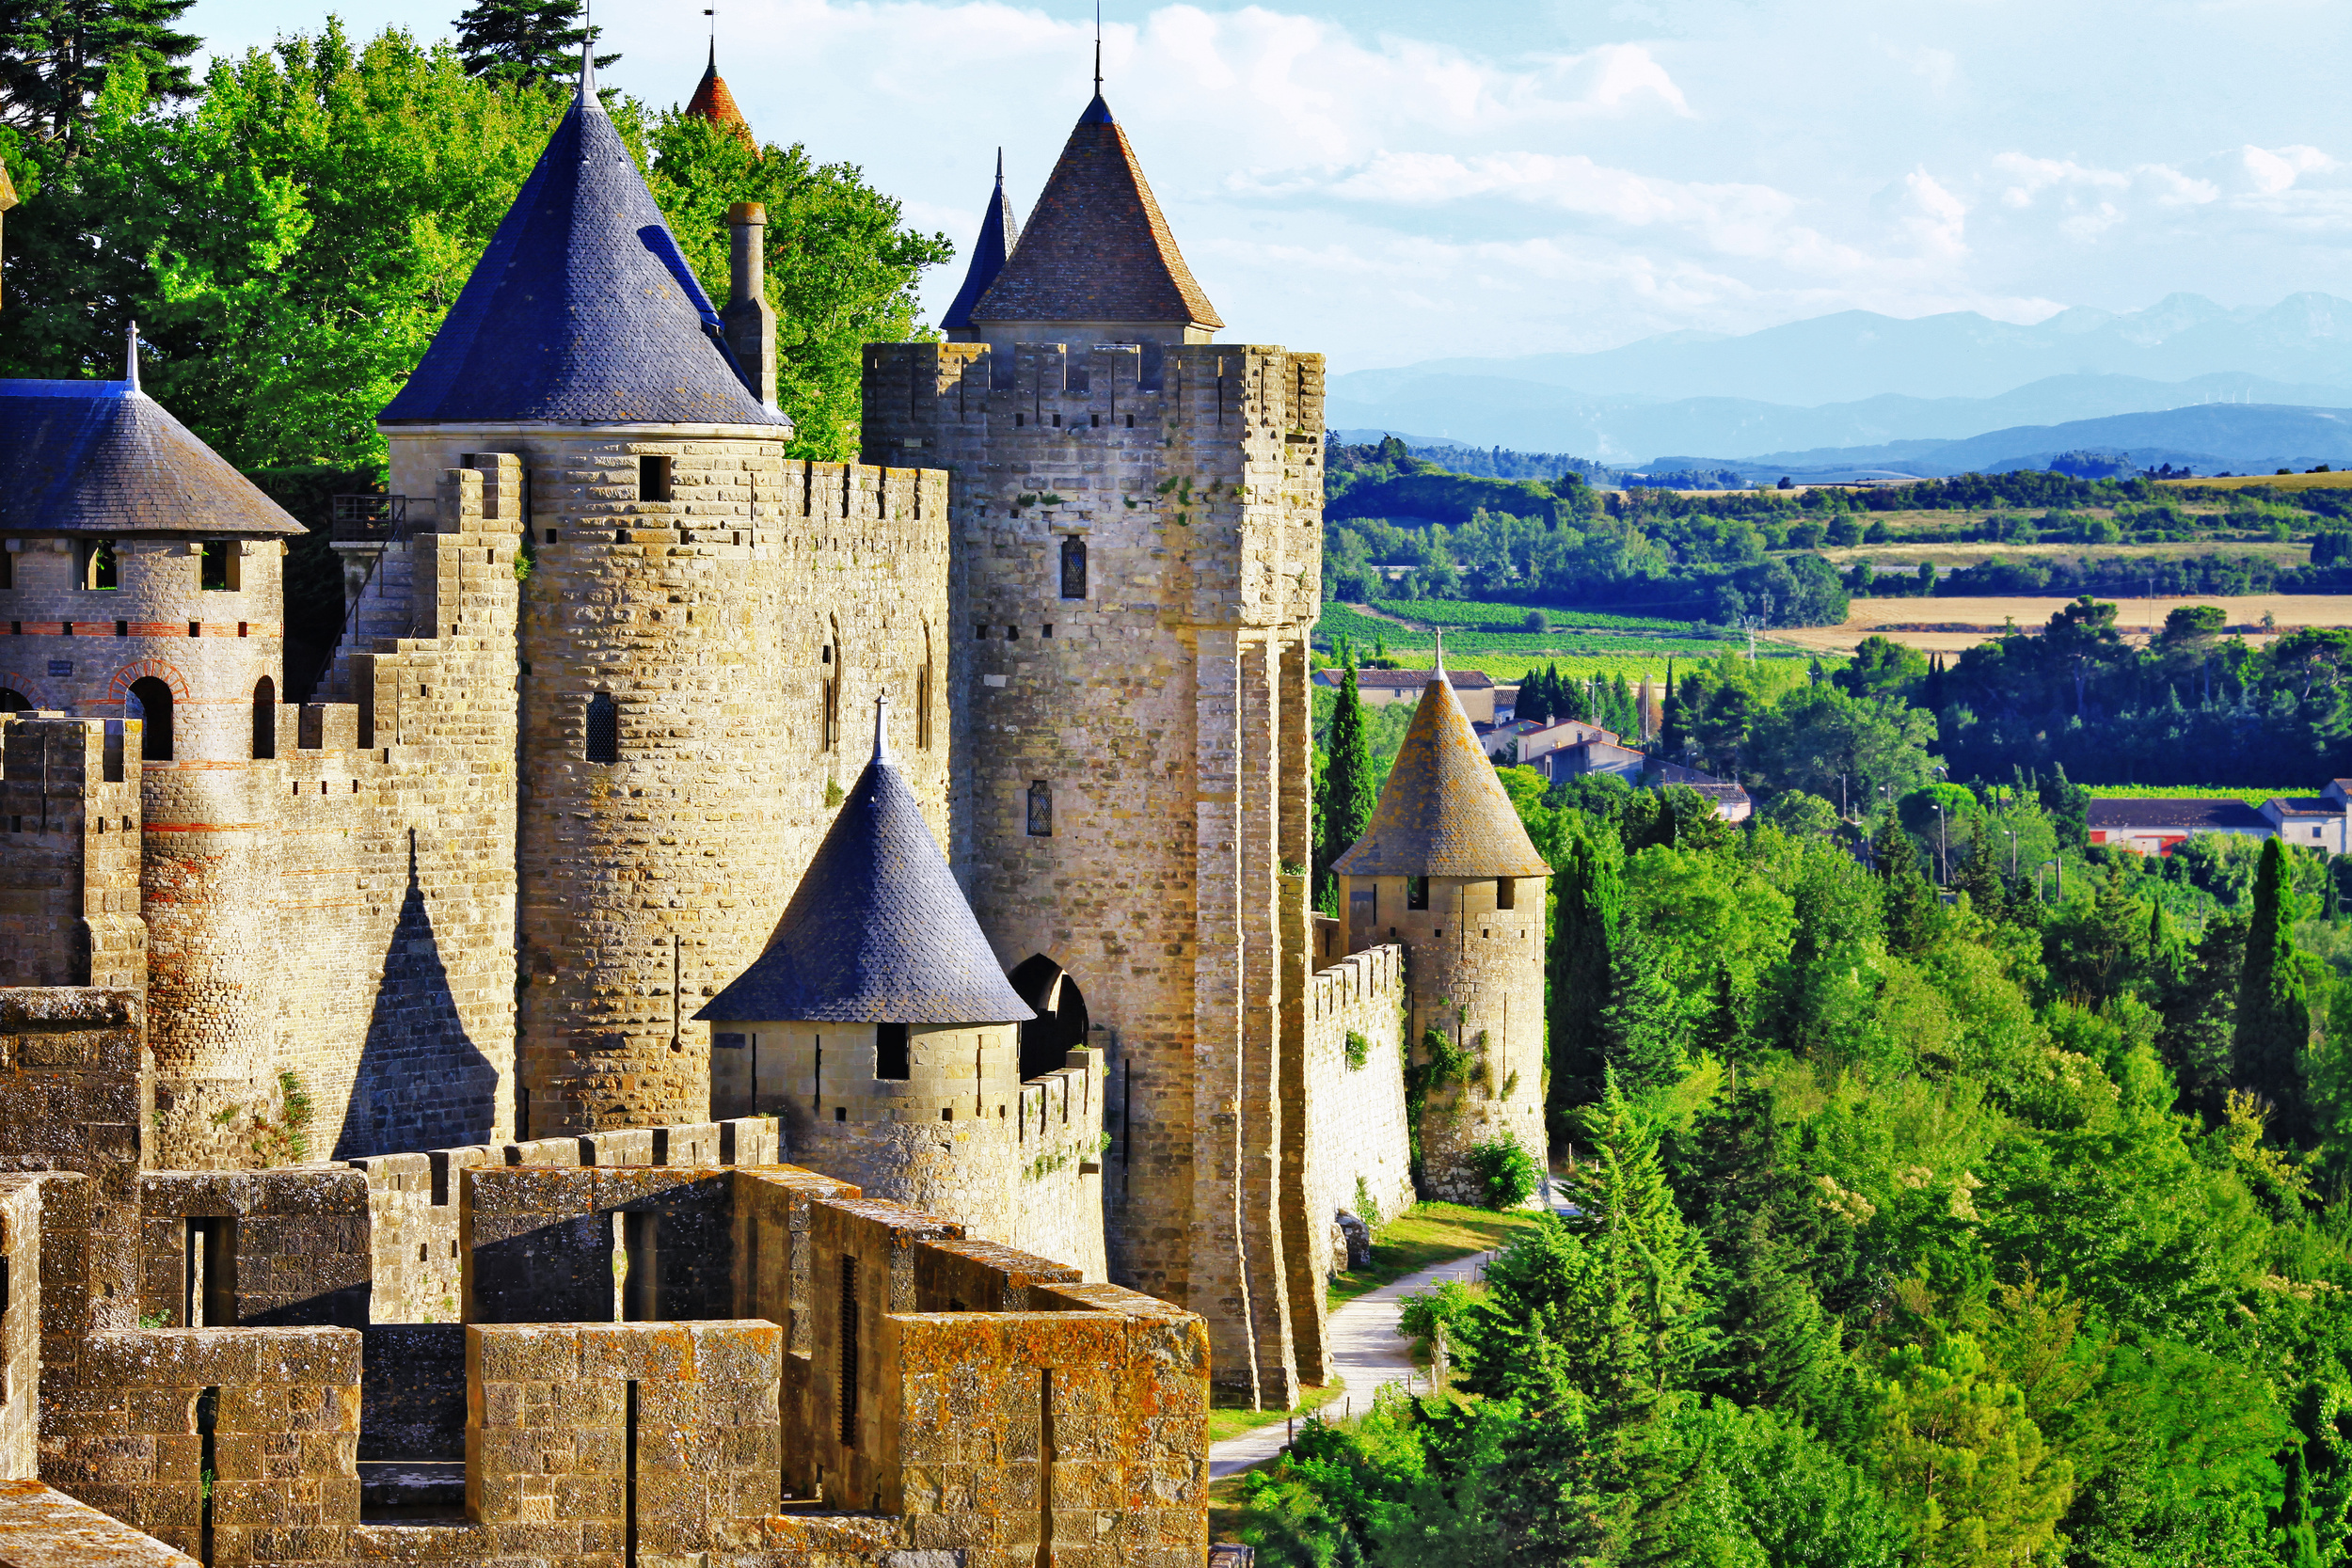 <p><span>Only 40 minutes by train from Toulouse, Carcassonne is one of the best-preserved medieval citadels. Perched on a hill overlooking the surrounding countryside, it offers some of the best views in Provence.</span></p><p>You may also like: <a href='https://www.yardbarker.com/lifestyle/articles/25_of_the_wildest_chip_flavors_from_all_around_the_world_031324/s1__23433628'>25 of the wildest chip flavors from all around the world</a></p>